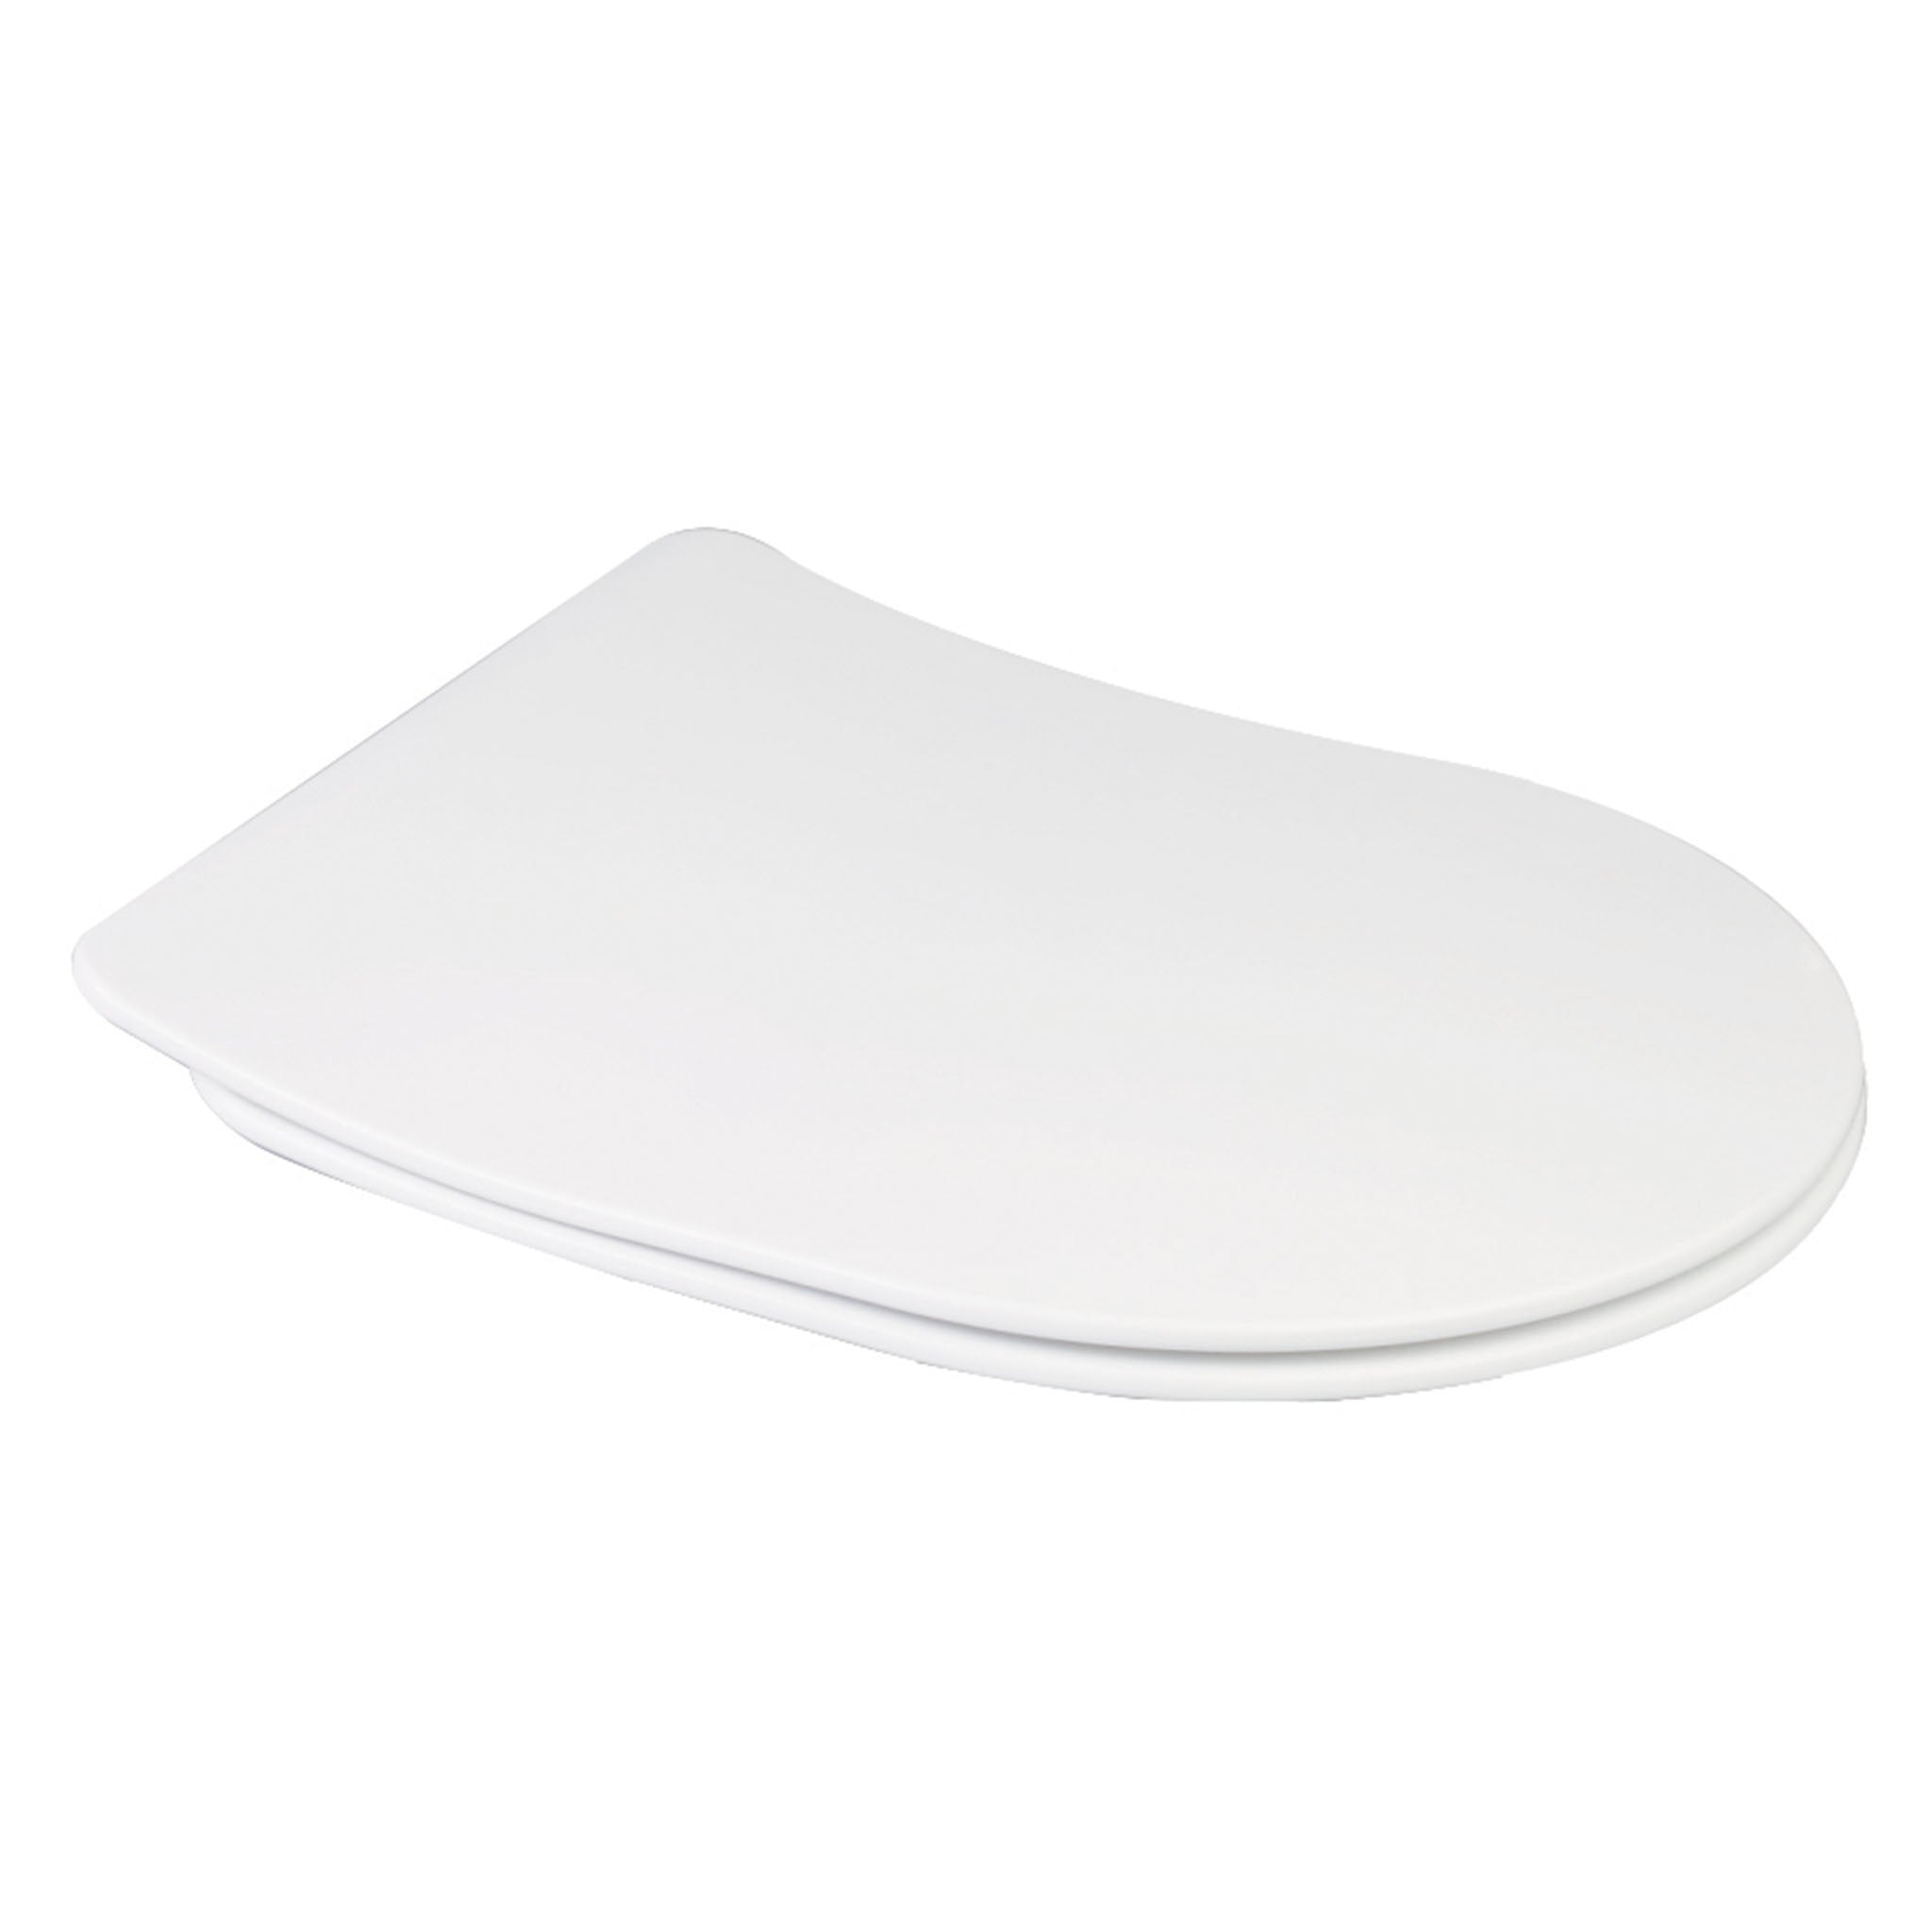 MyLife DT Slim D Shaped Soft Close Quick Release Toilet Seat